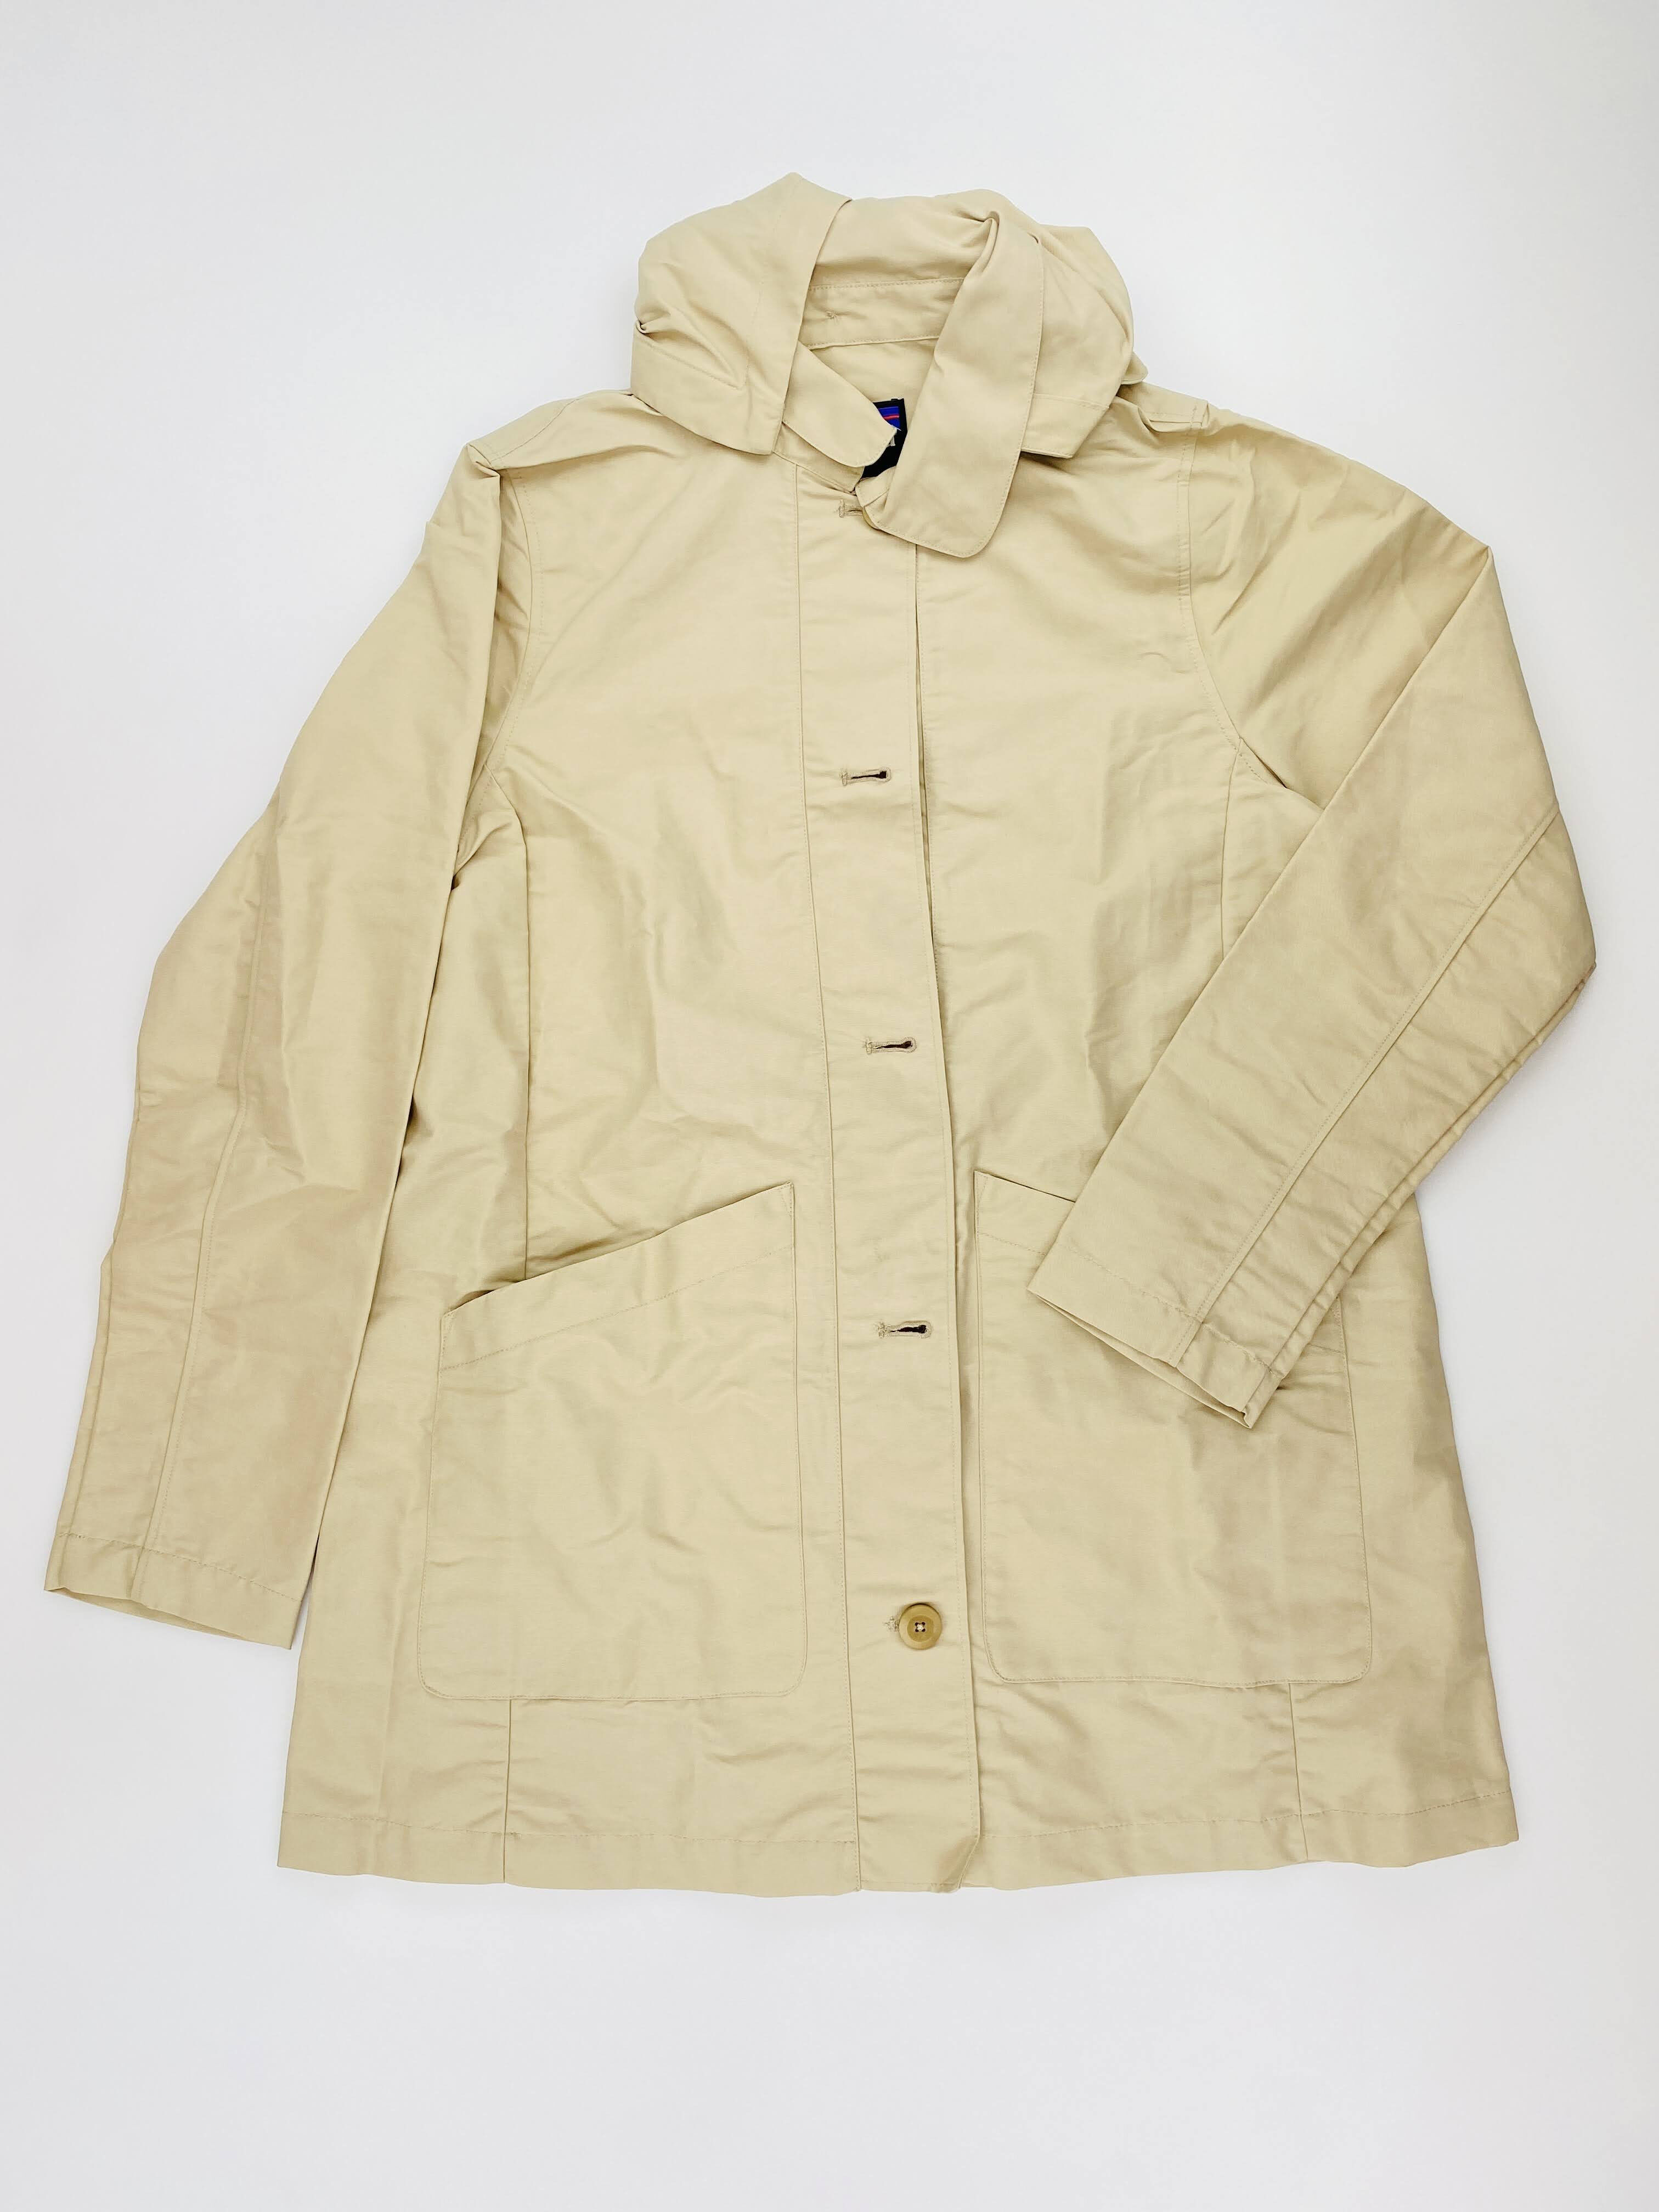 Patagonia W's Transitional Trench Jkt - Giacca di seconda mano - Donna - Beige - S | Hardloop